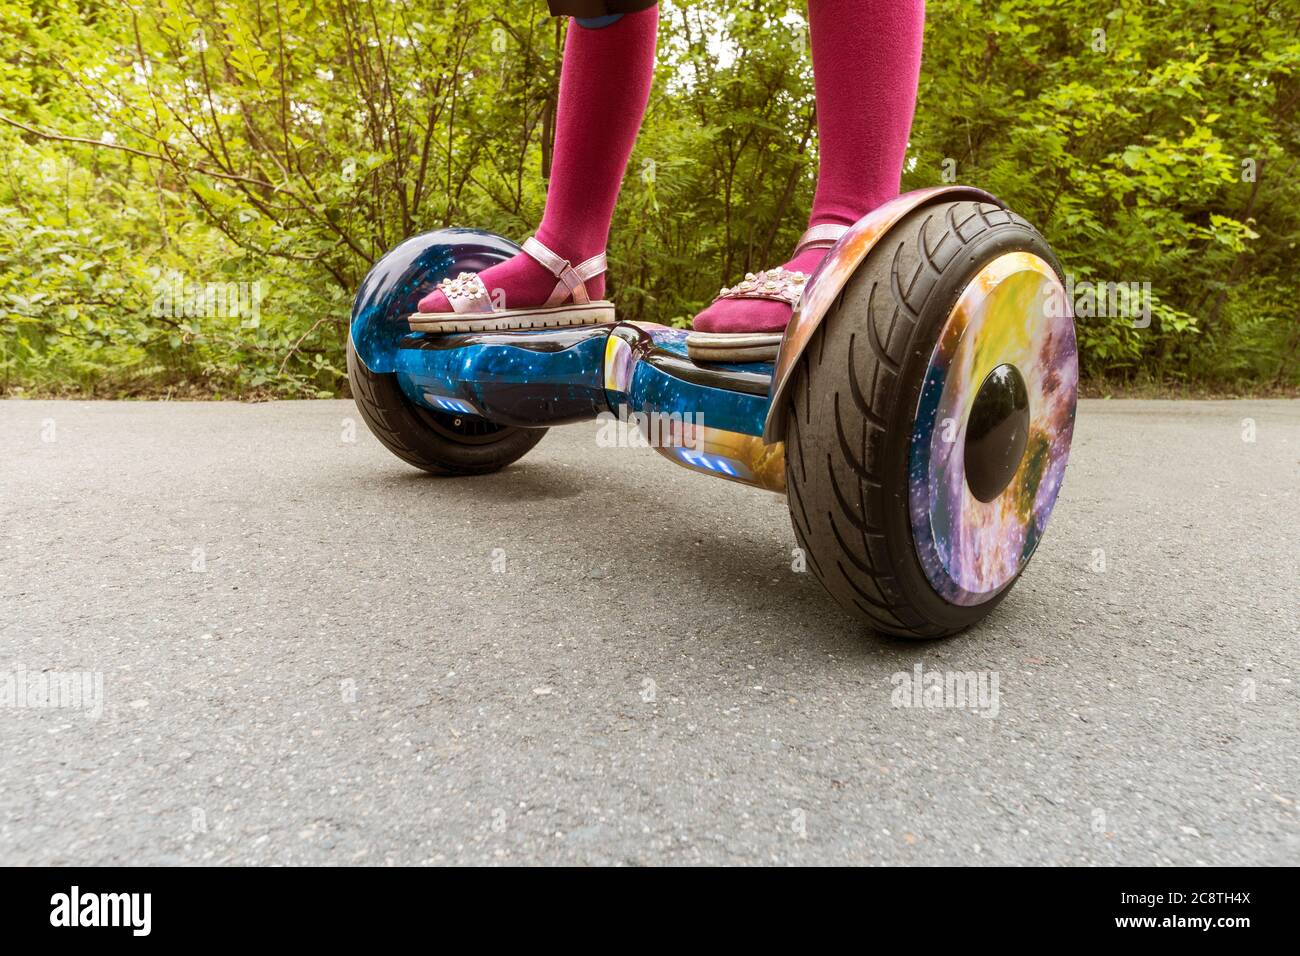 Mini Segway High Resolution Stock Photography and Images - Alamy